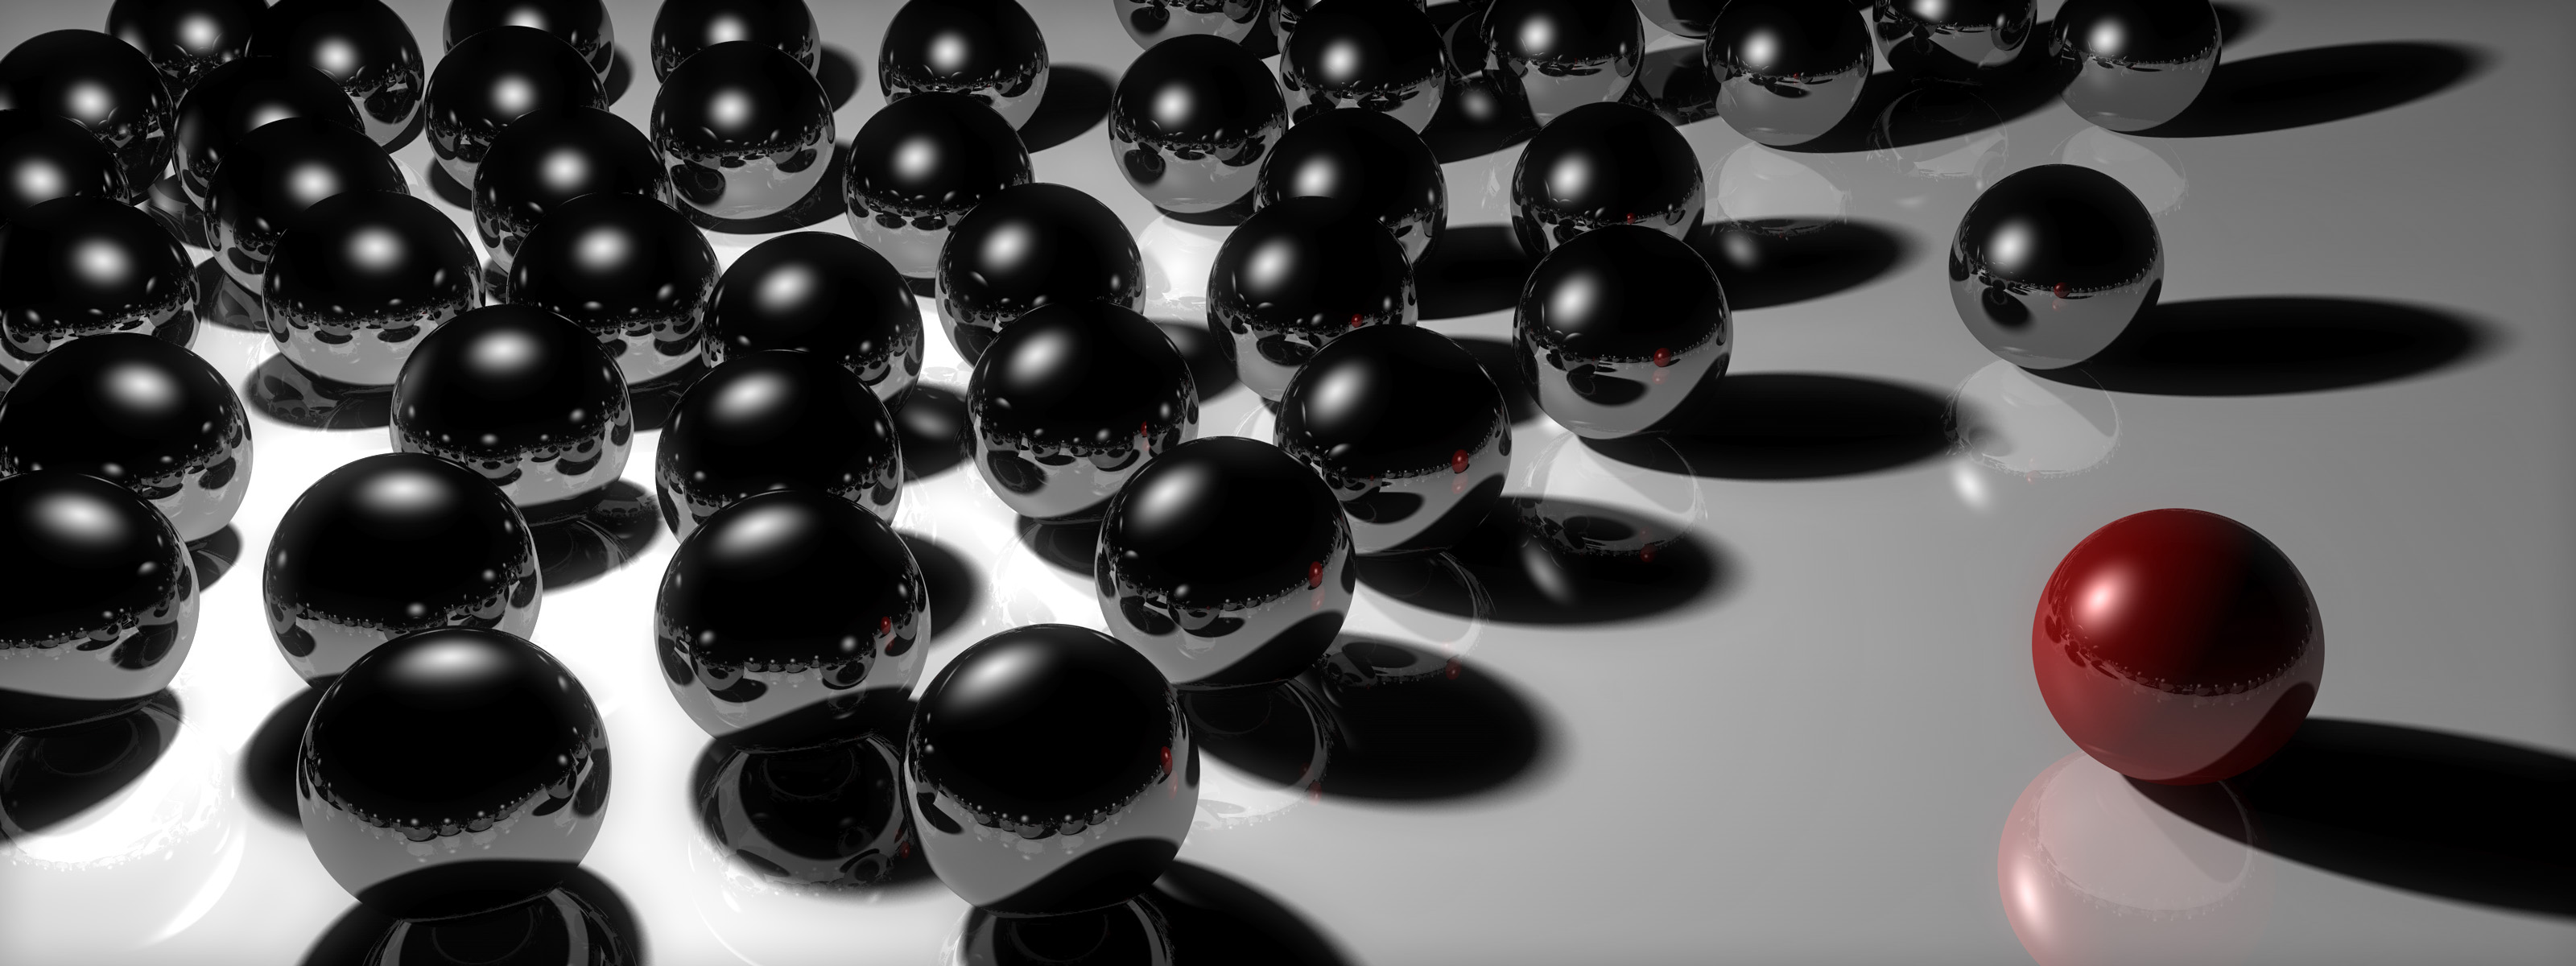 Wallpaper Background Black Dual Screen Red Balls Right